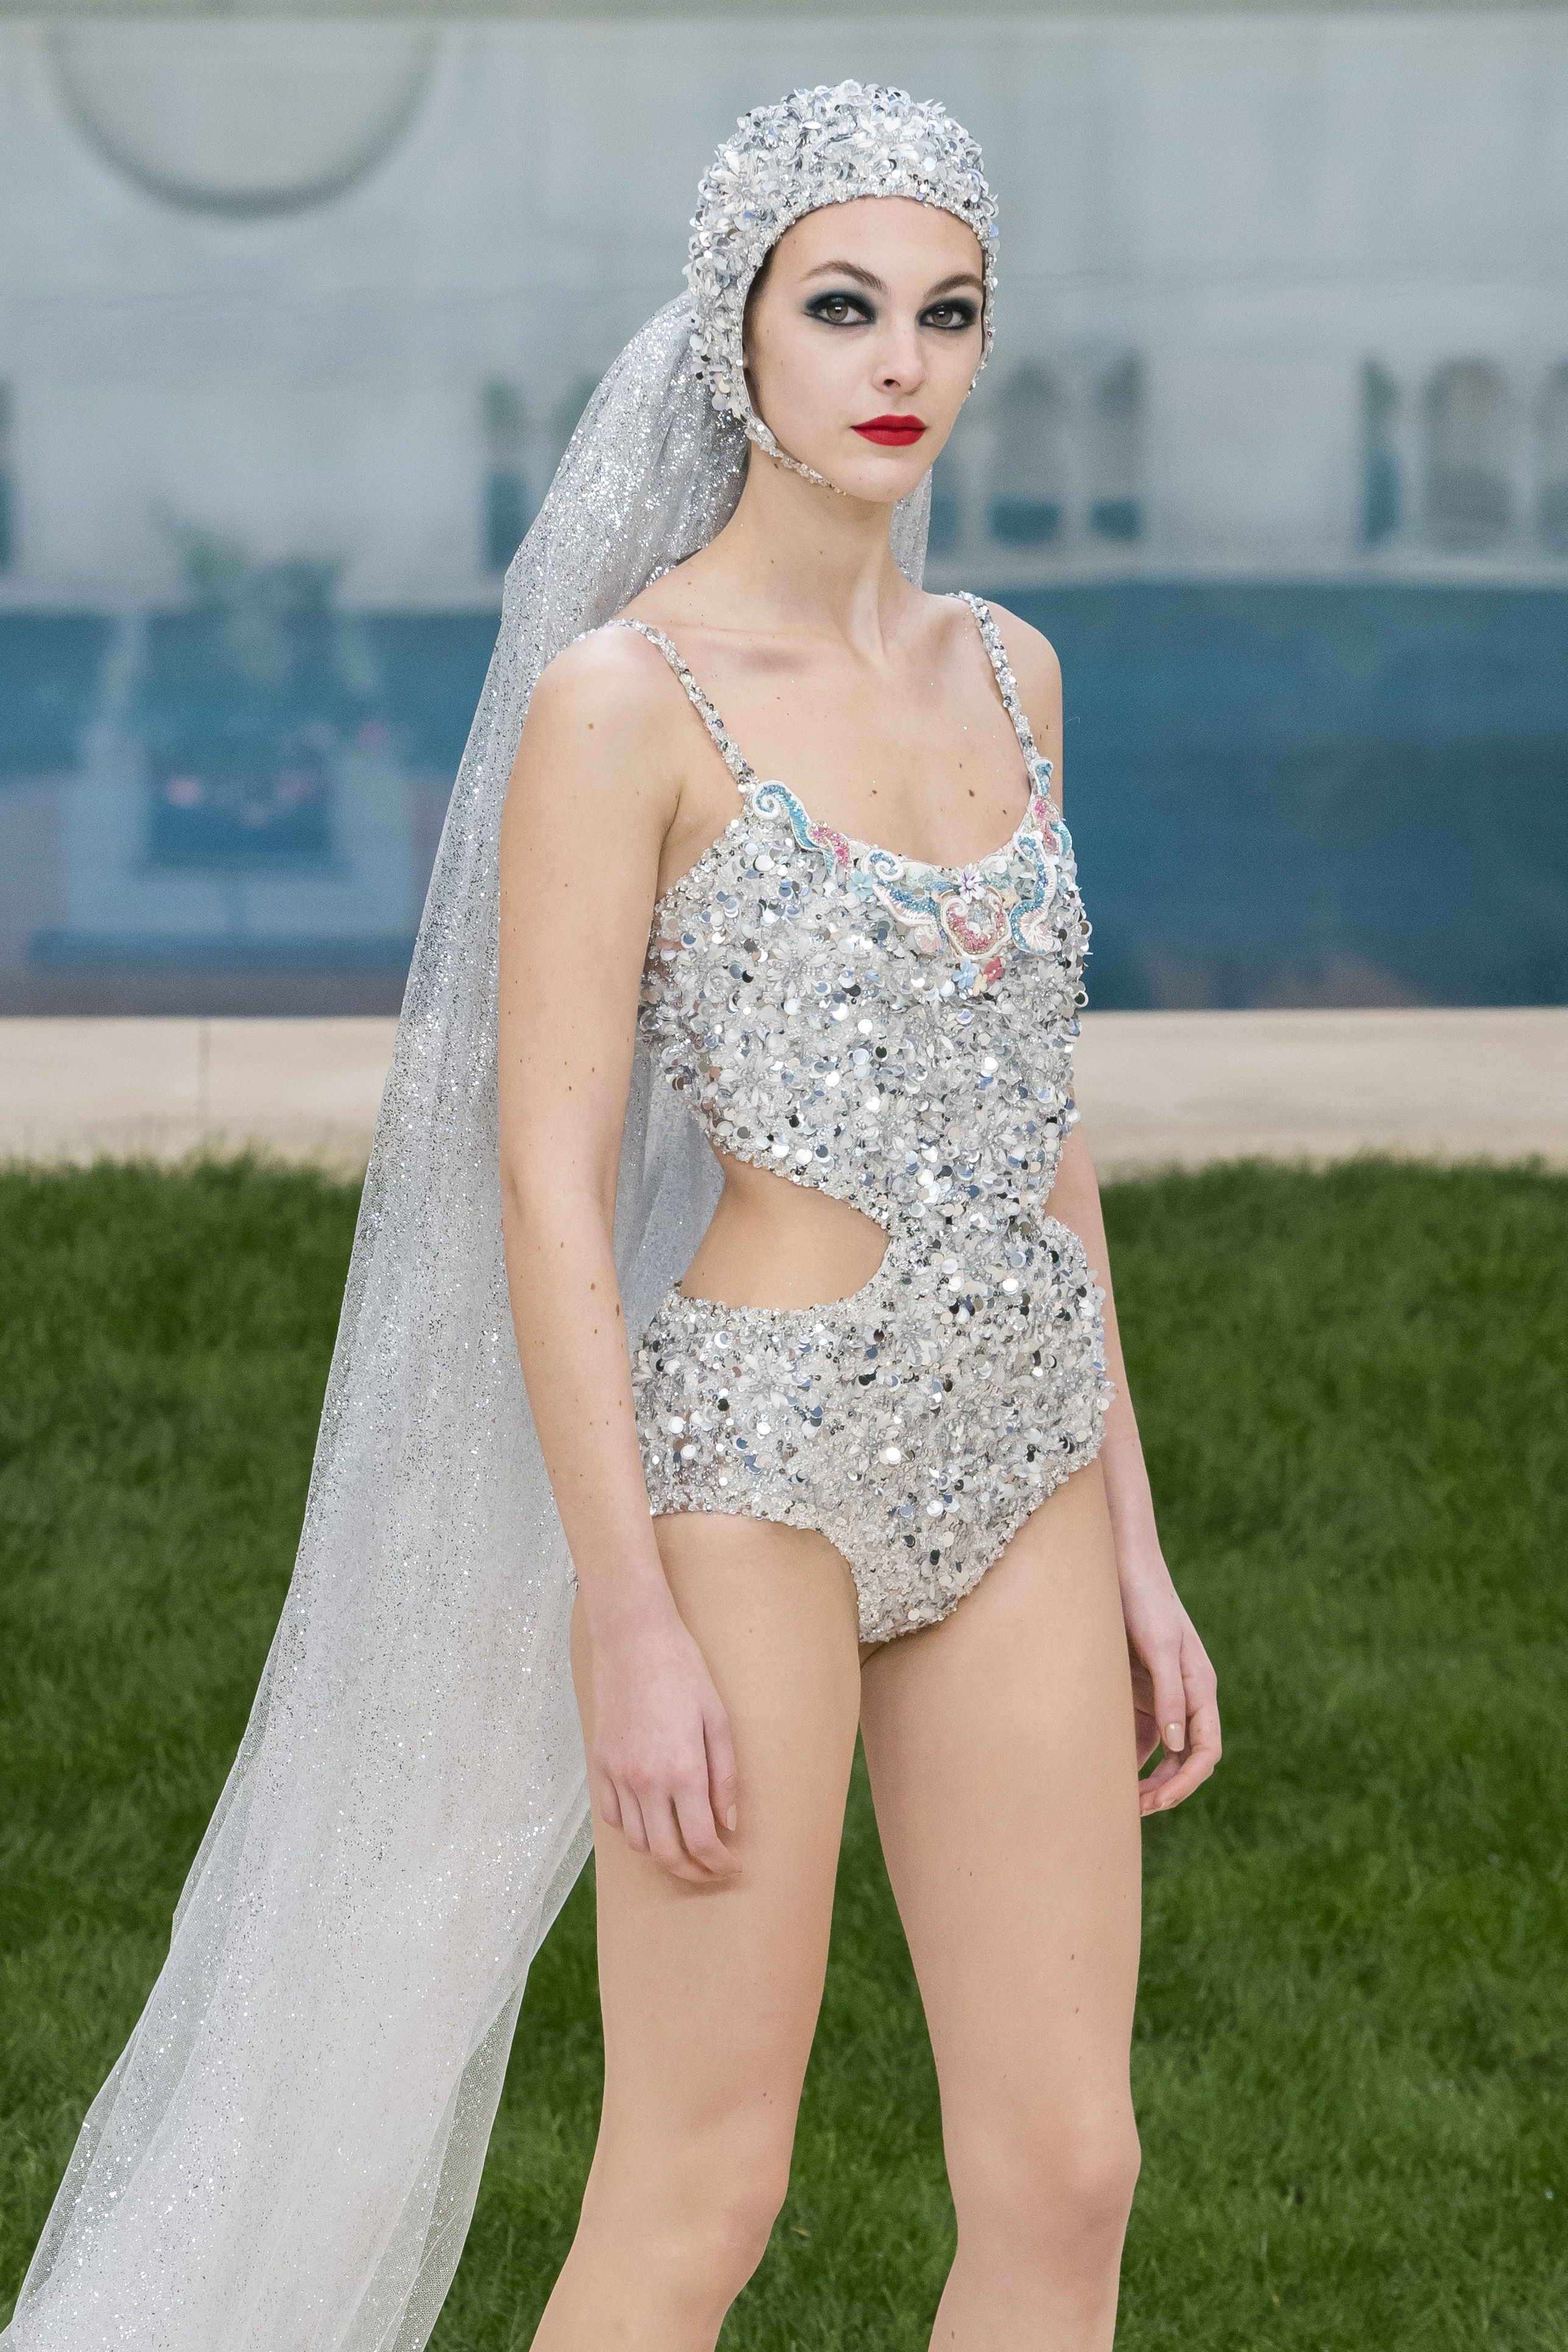 Chanel Couture Just Kicked Off A Key Bridal Wedding Dress Trend